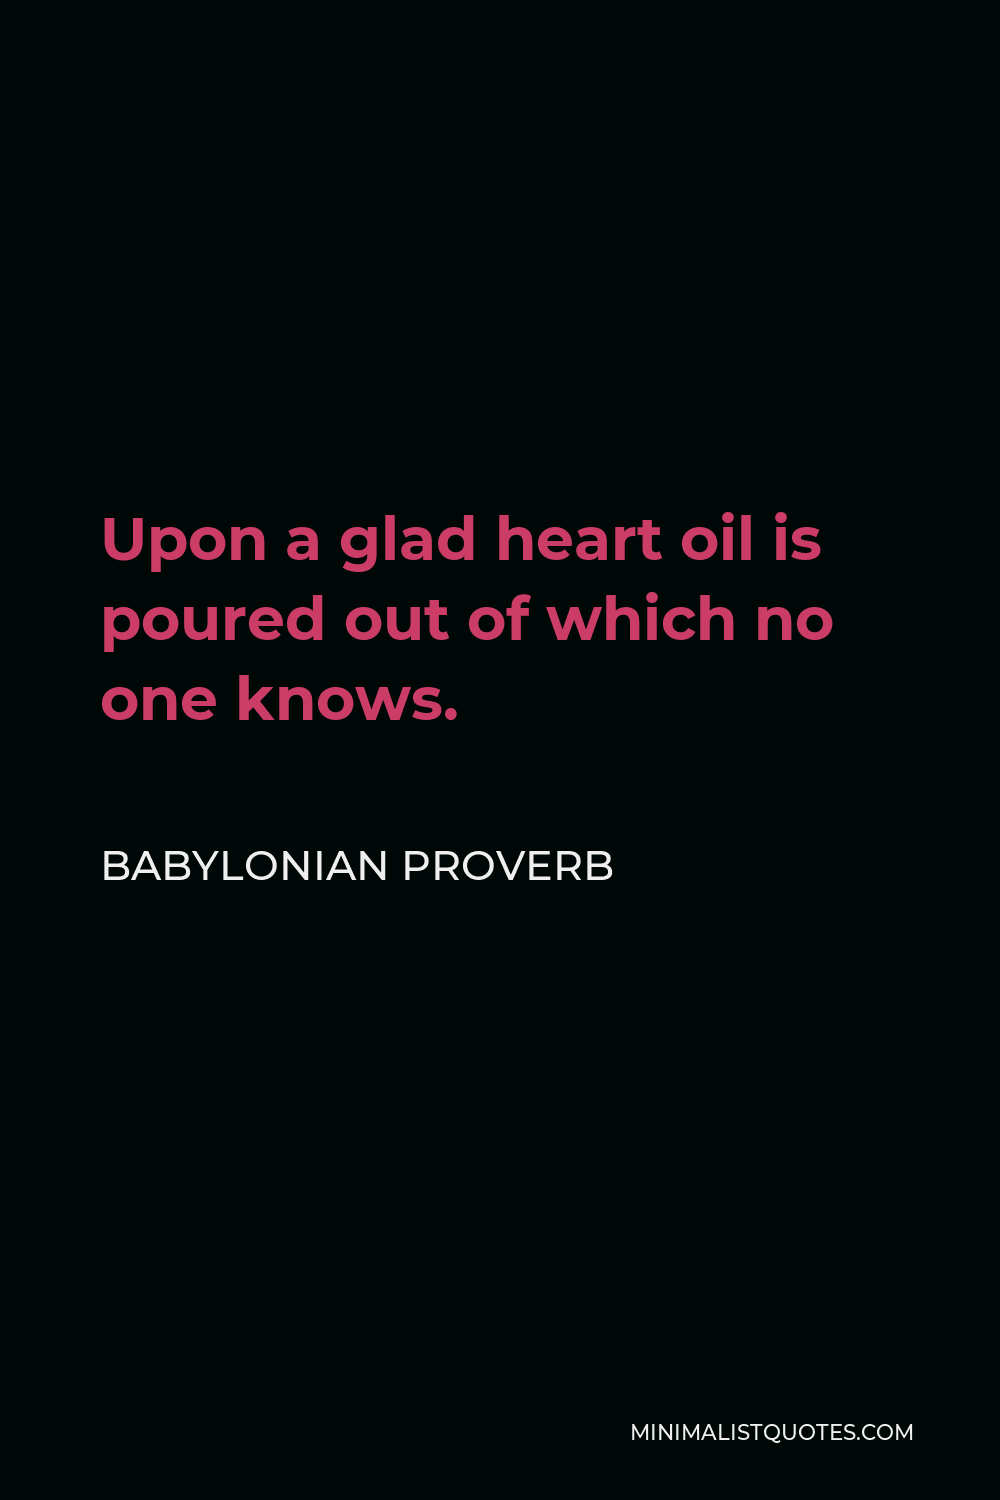 Babylonian Proverb Quote - Upon a glad heart oil is poured out of which no one knows.